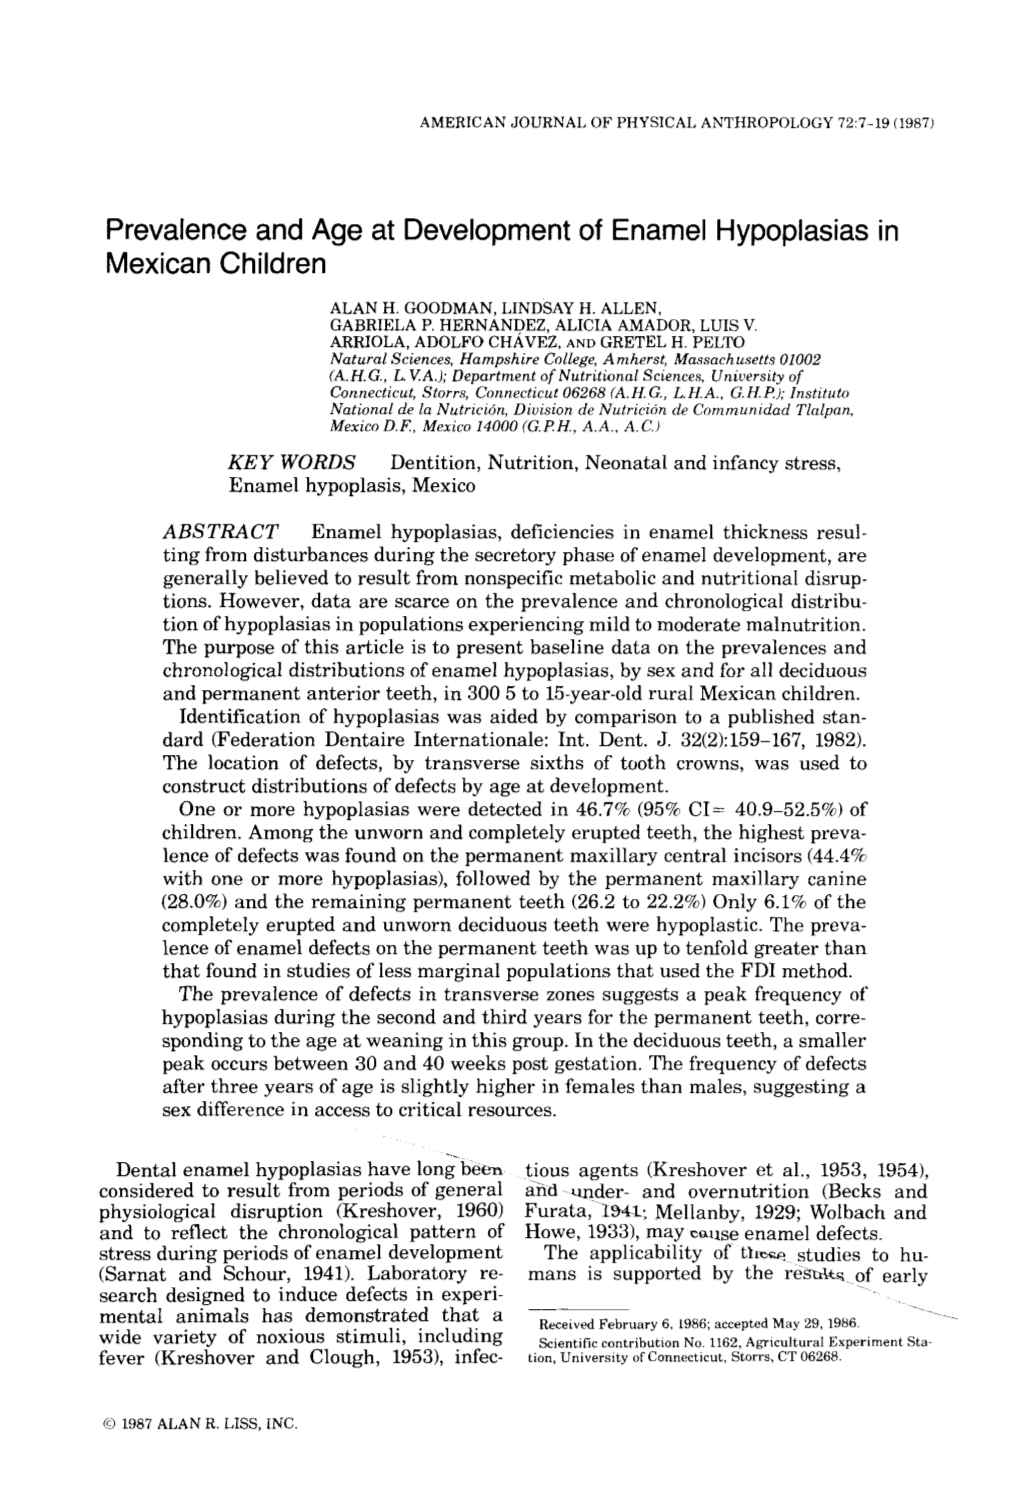 Prevalence and Age at Development of Enamel Hypoplasias in Mexican Children